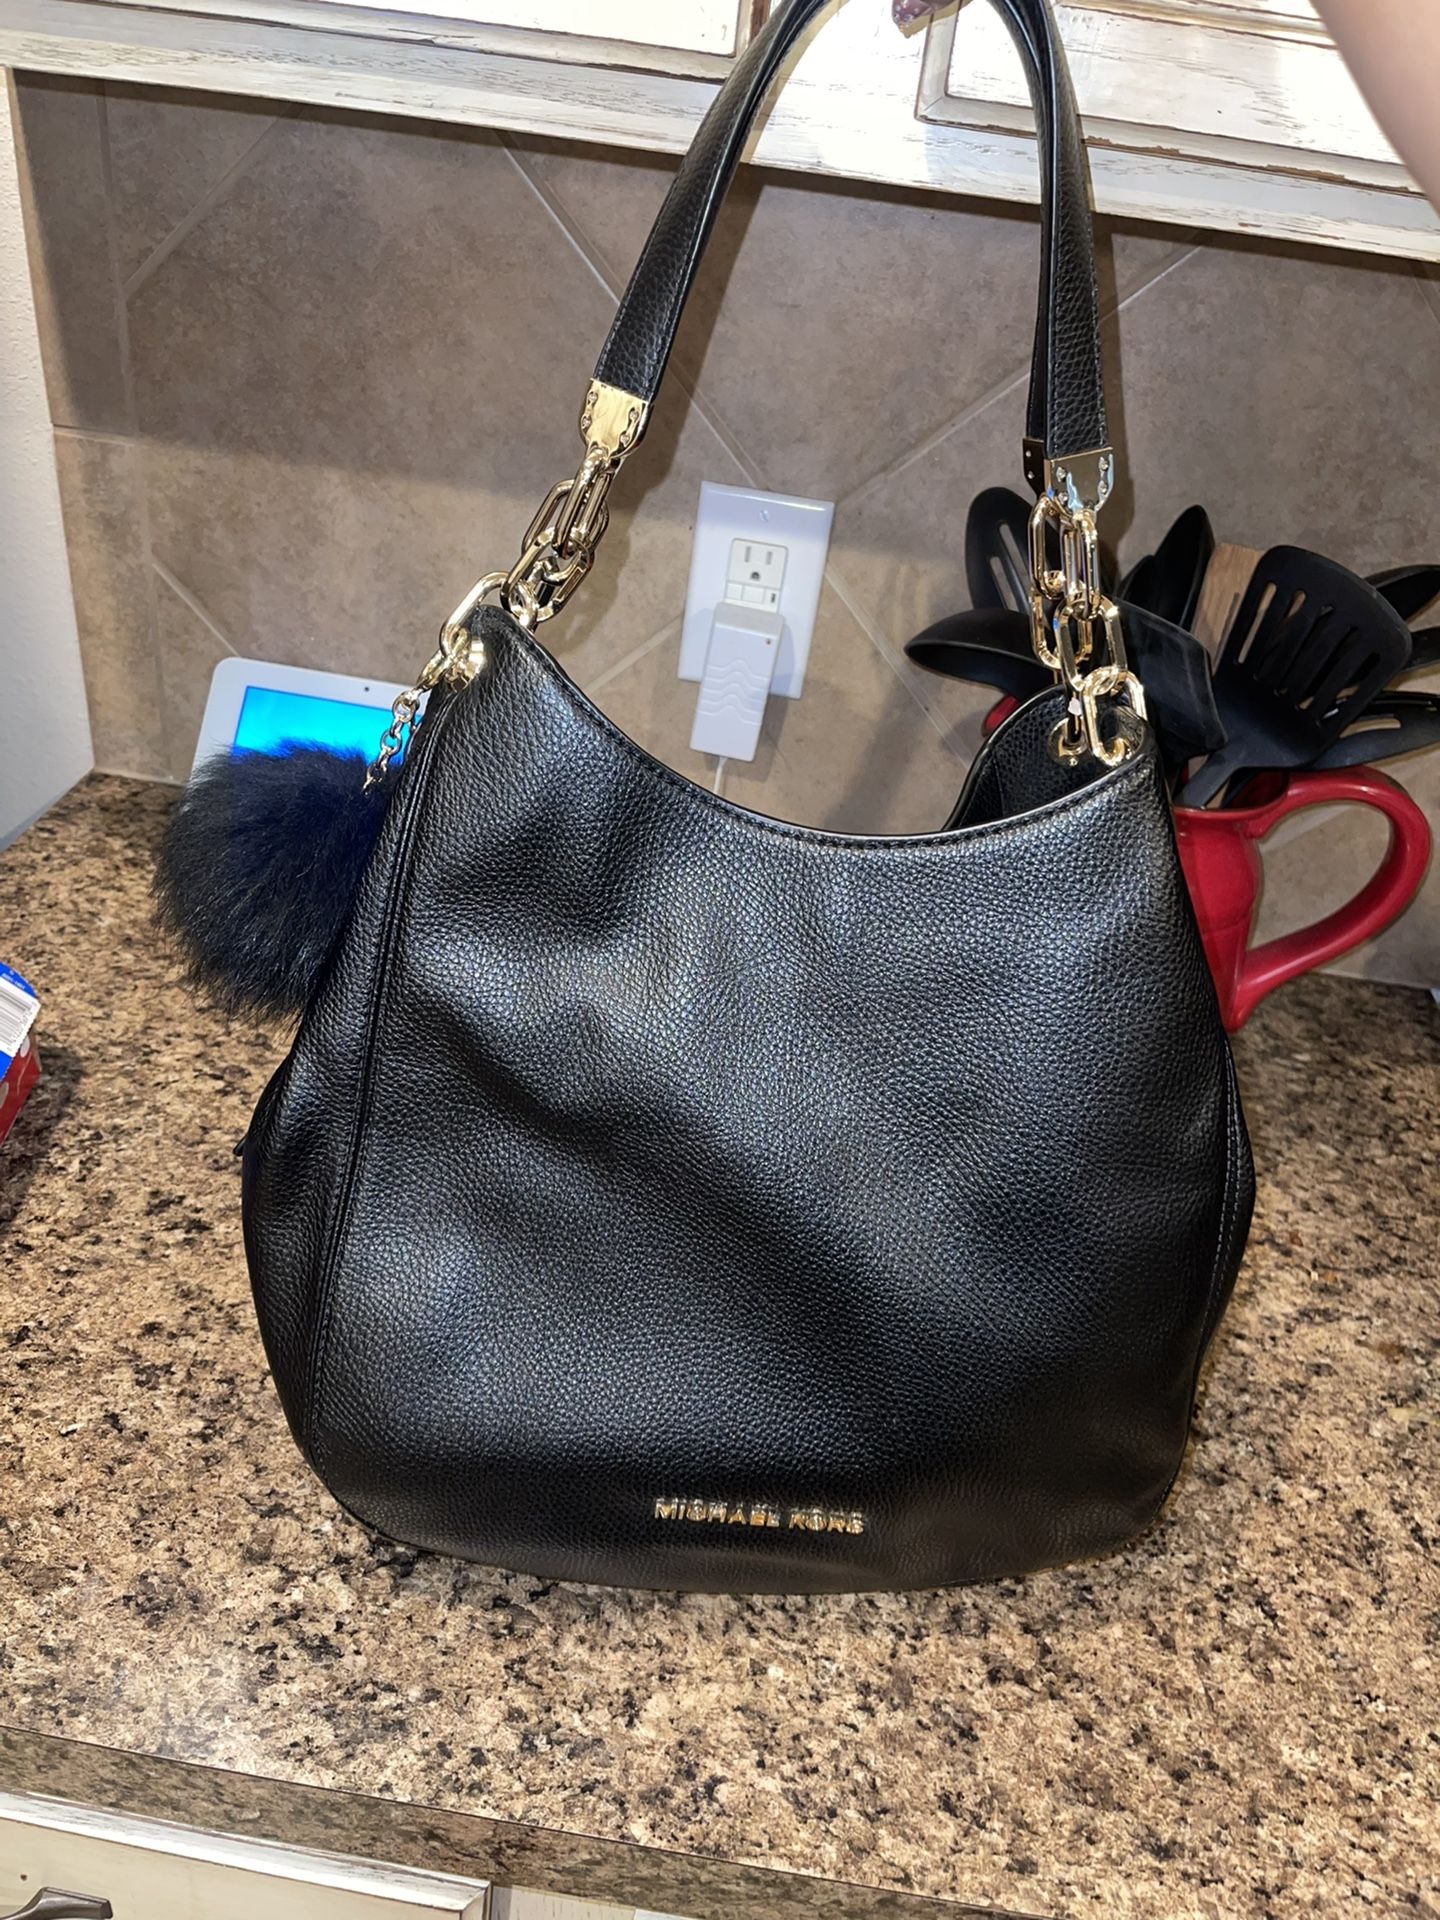 Michael Kors Lillie Large Chain Shoulder Tote for Sale in Conroe